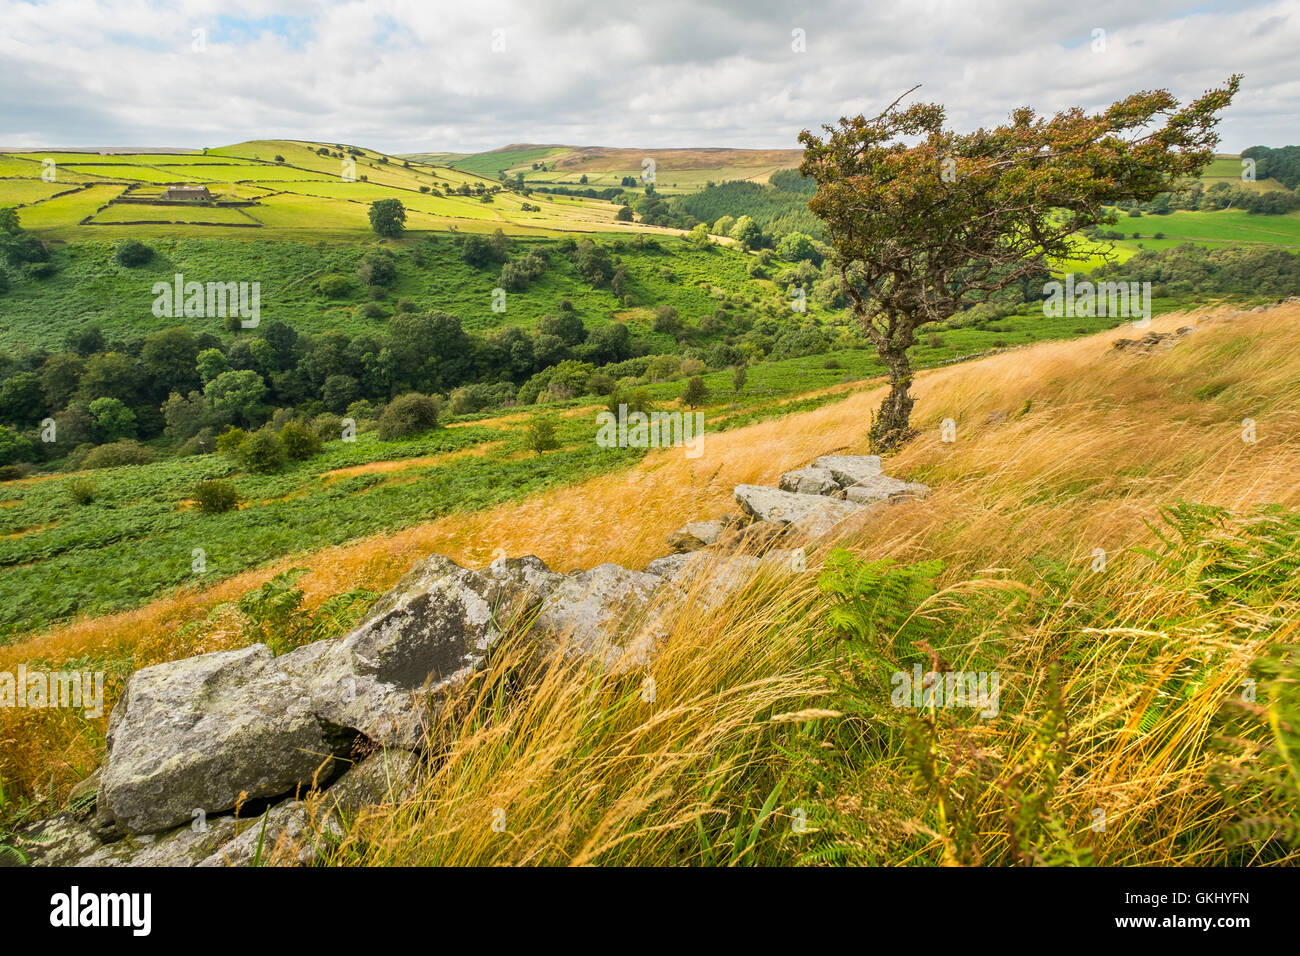 The view northwards from Bretton Clough towards Abney,Derbyshire, in the Peak District National Park,UK Stock Photo